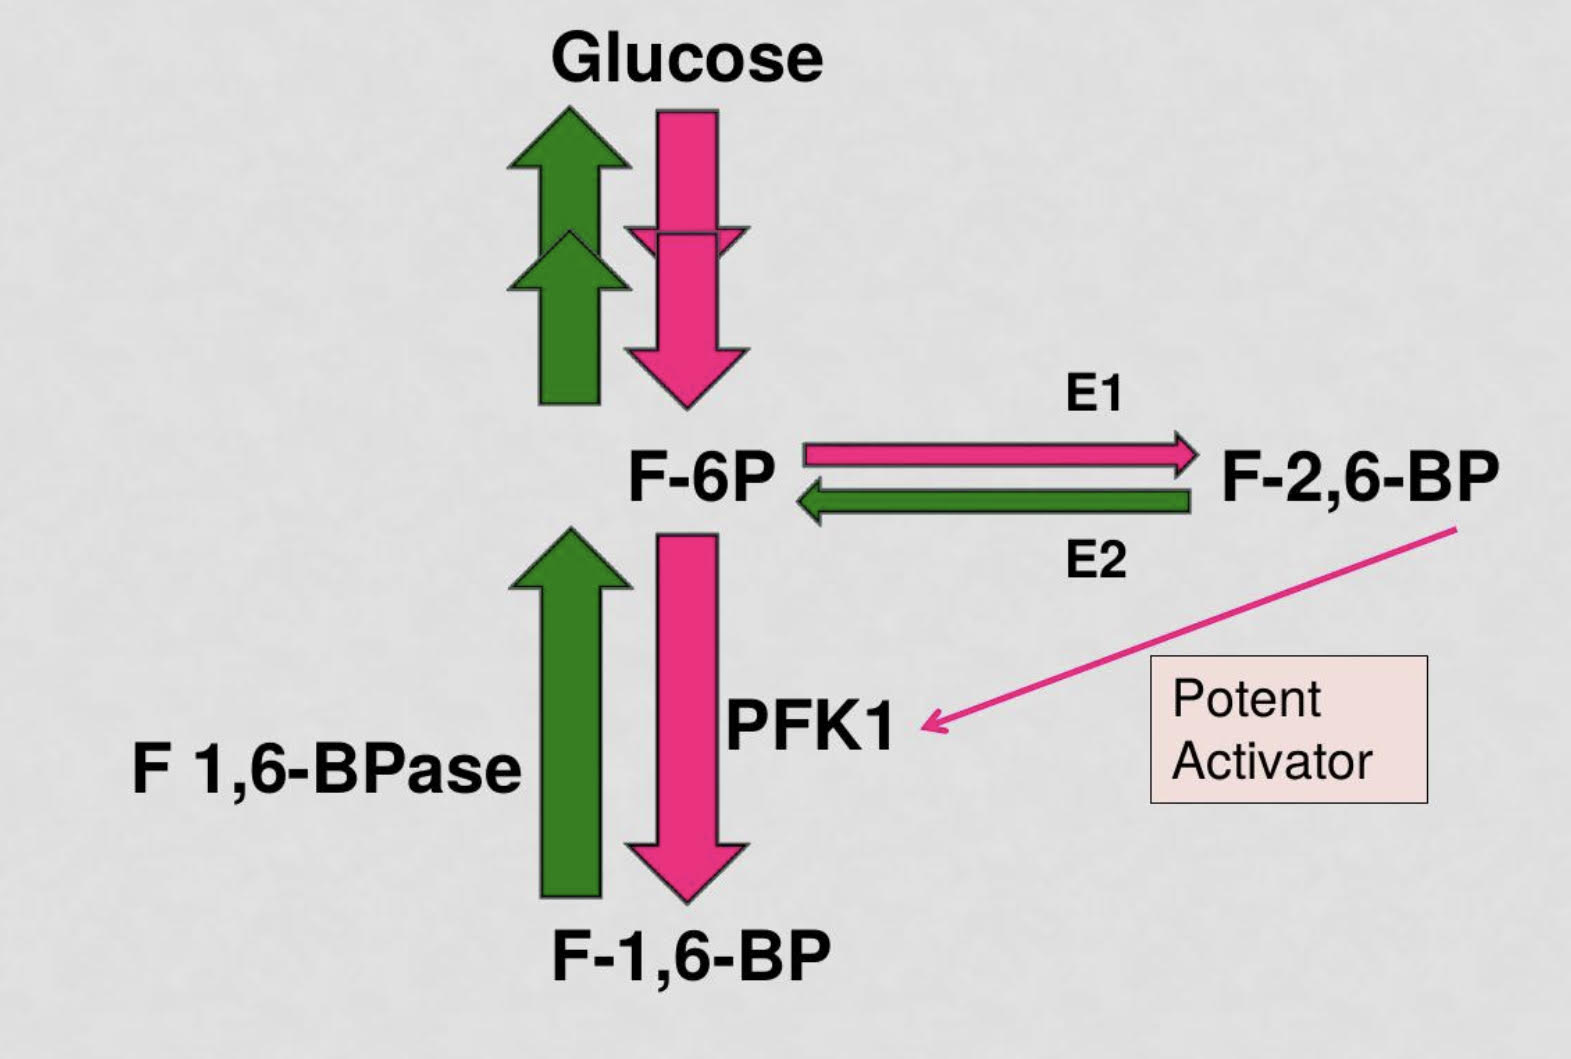 <p>PFK2 uses some fructose-6-phosphate to create F-2,6-BP which is a potent activator of the enzyme PFK1 which facilitates glycolysis</p><p>FBPase2 is an inhibitory enzyme that reduces concentration of F-2,6-BP and increases activation of F-1,6-BPase which converts fructose-1,6-bisphosphate to fructose-6-ohosphate and facilitates gluconeogenesis</p><p>in states of high blood sugar levels, Insulin will be released and PFK2 will be activated to catalyze glycolysis PFK2 will use some fructose-6-phosphate to create fructose-2,6-bisphosphate which will highly catalyze the activity of PFK1 to turn fructose-6-phosphate to fructose-1,6-bisphosphate for glycolysis</p><p>in states of low blood sugar levels, glucagon will be released and FBPase2  will predominate and decrease the concentration of F 2,6 bpase and F1,6BPase will activate to catalyze gluconeogenesis</p><p>when the PKF2 domain of the bifunctional enzyme is phosphorylated, gluconeogenesis is activated due to the increased activity of fructose-1,6-bisphosphatase when the PFK2 domain is not phosphorylated, glycolysis prevails as PFK2 is active</p>